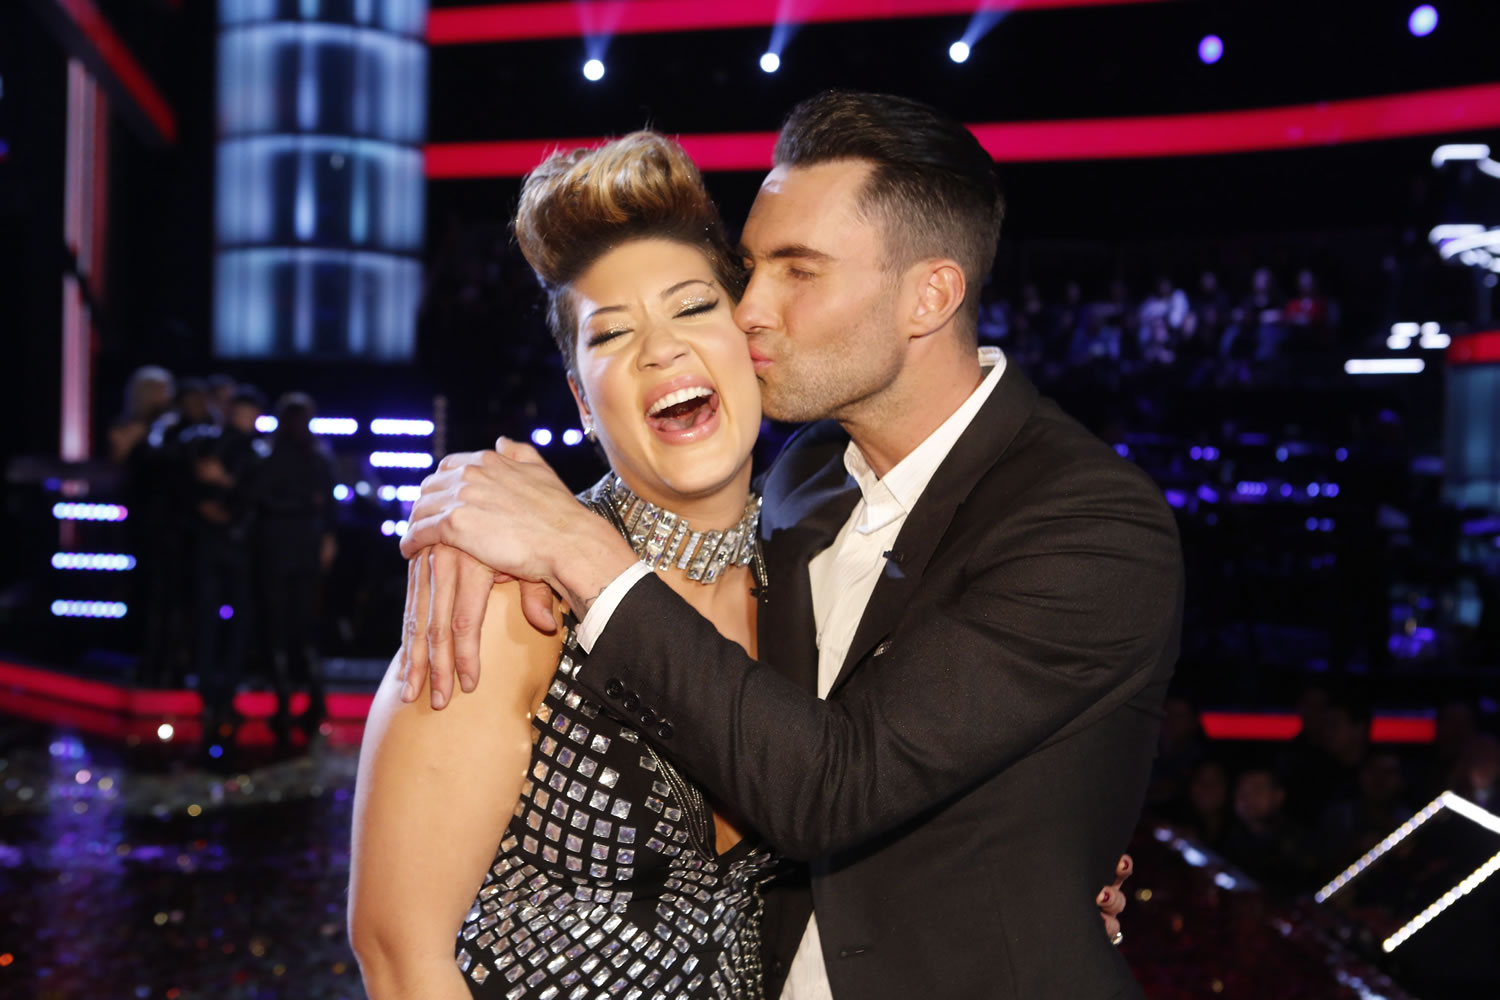 Maroon 5 frontman Adam Levine, right, kisses Tessanne Chin on the cheek after Chin was announced the season five winner of &quot;The Voice&quot; on Dec.